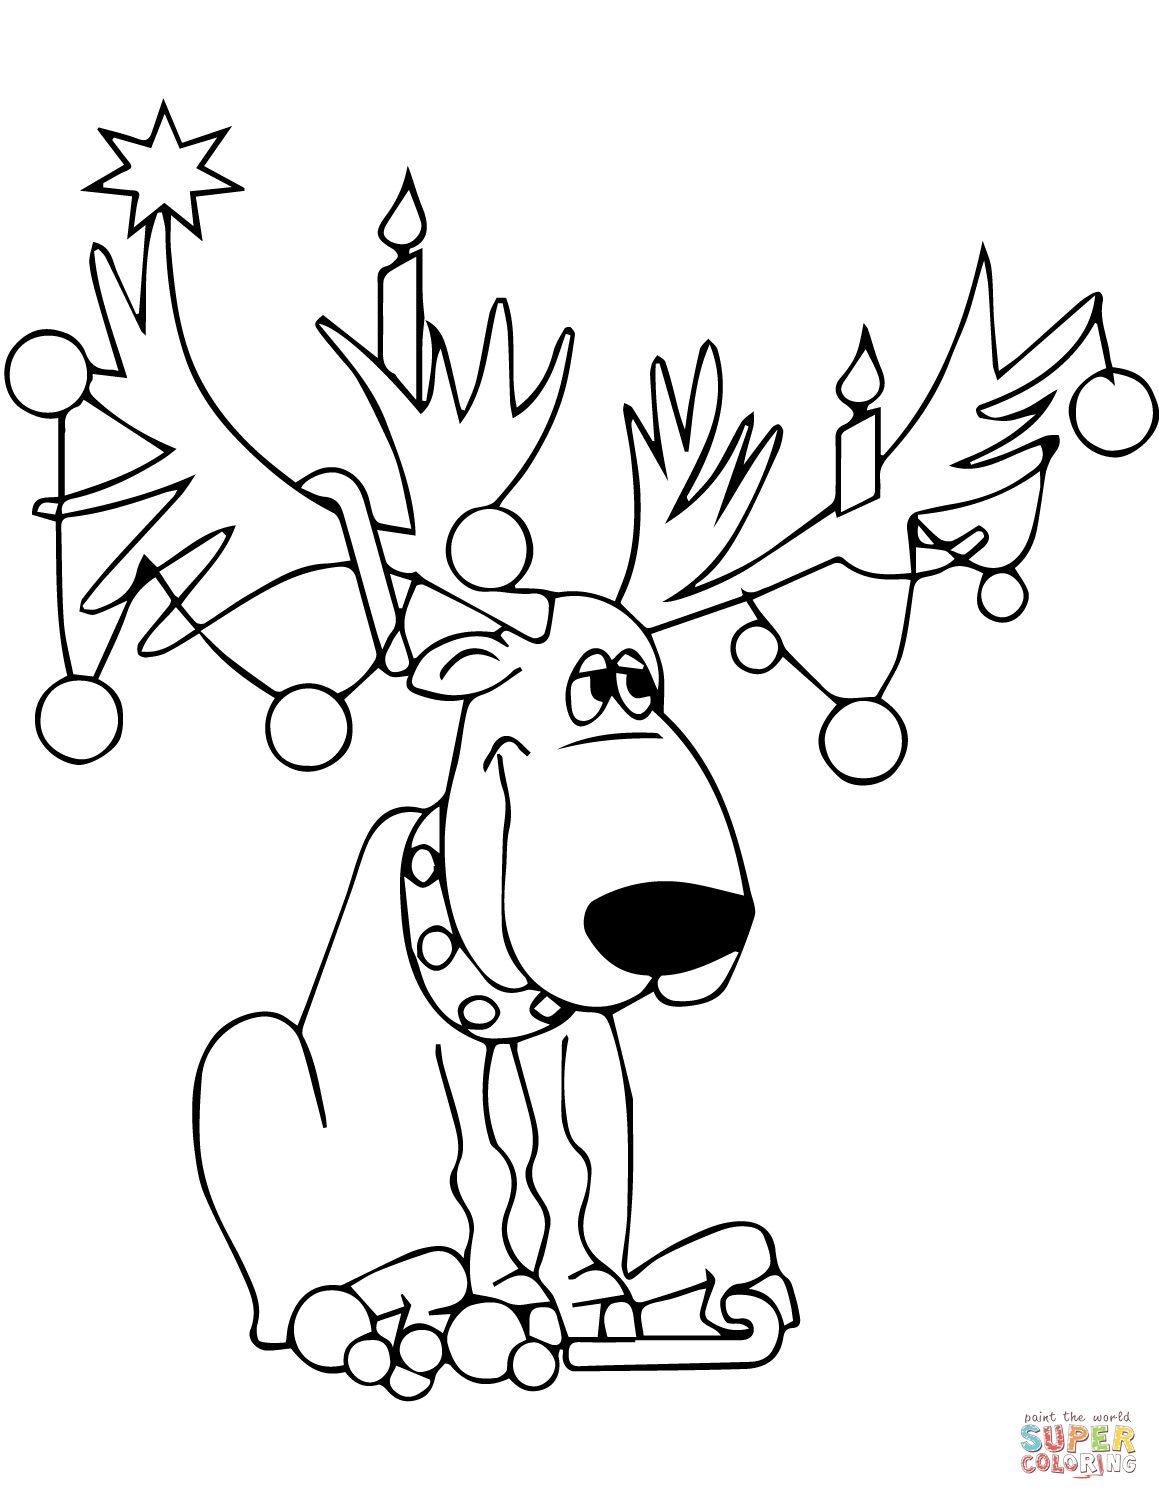 Reindeer Coloring Pages - Christmas Lights On Reindeer Antlers - Free Printable Christmas Lights Coloring Pages